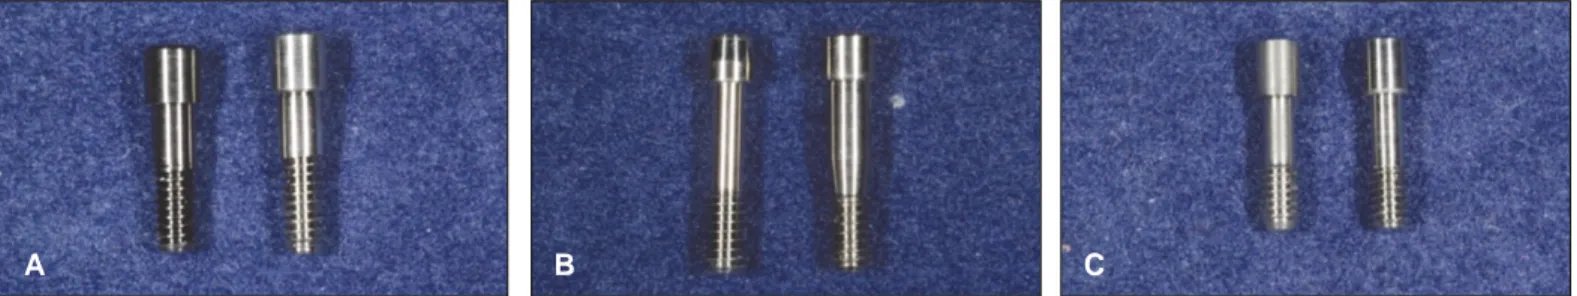 Fig. 1. Three different implants used in this study. A: Osstem GS II, B: Astra, C: Zimmer.